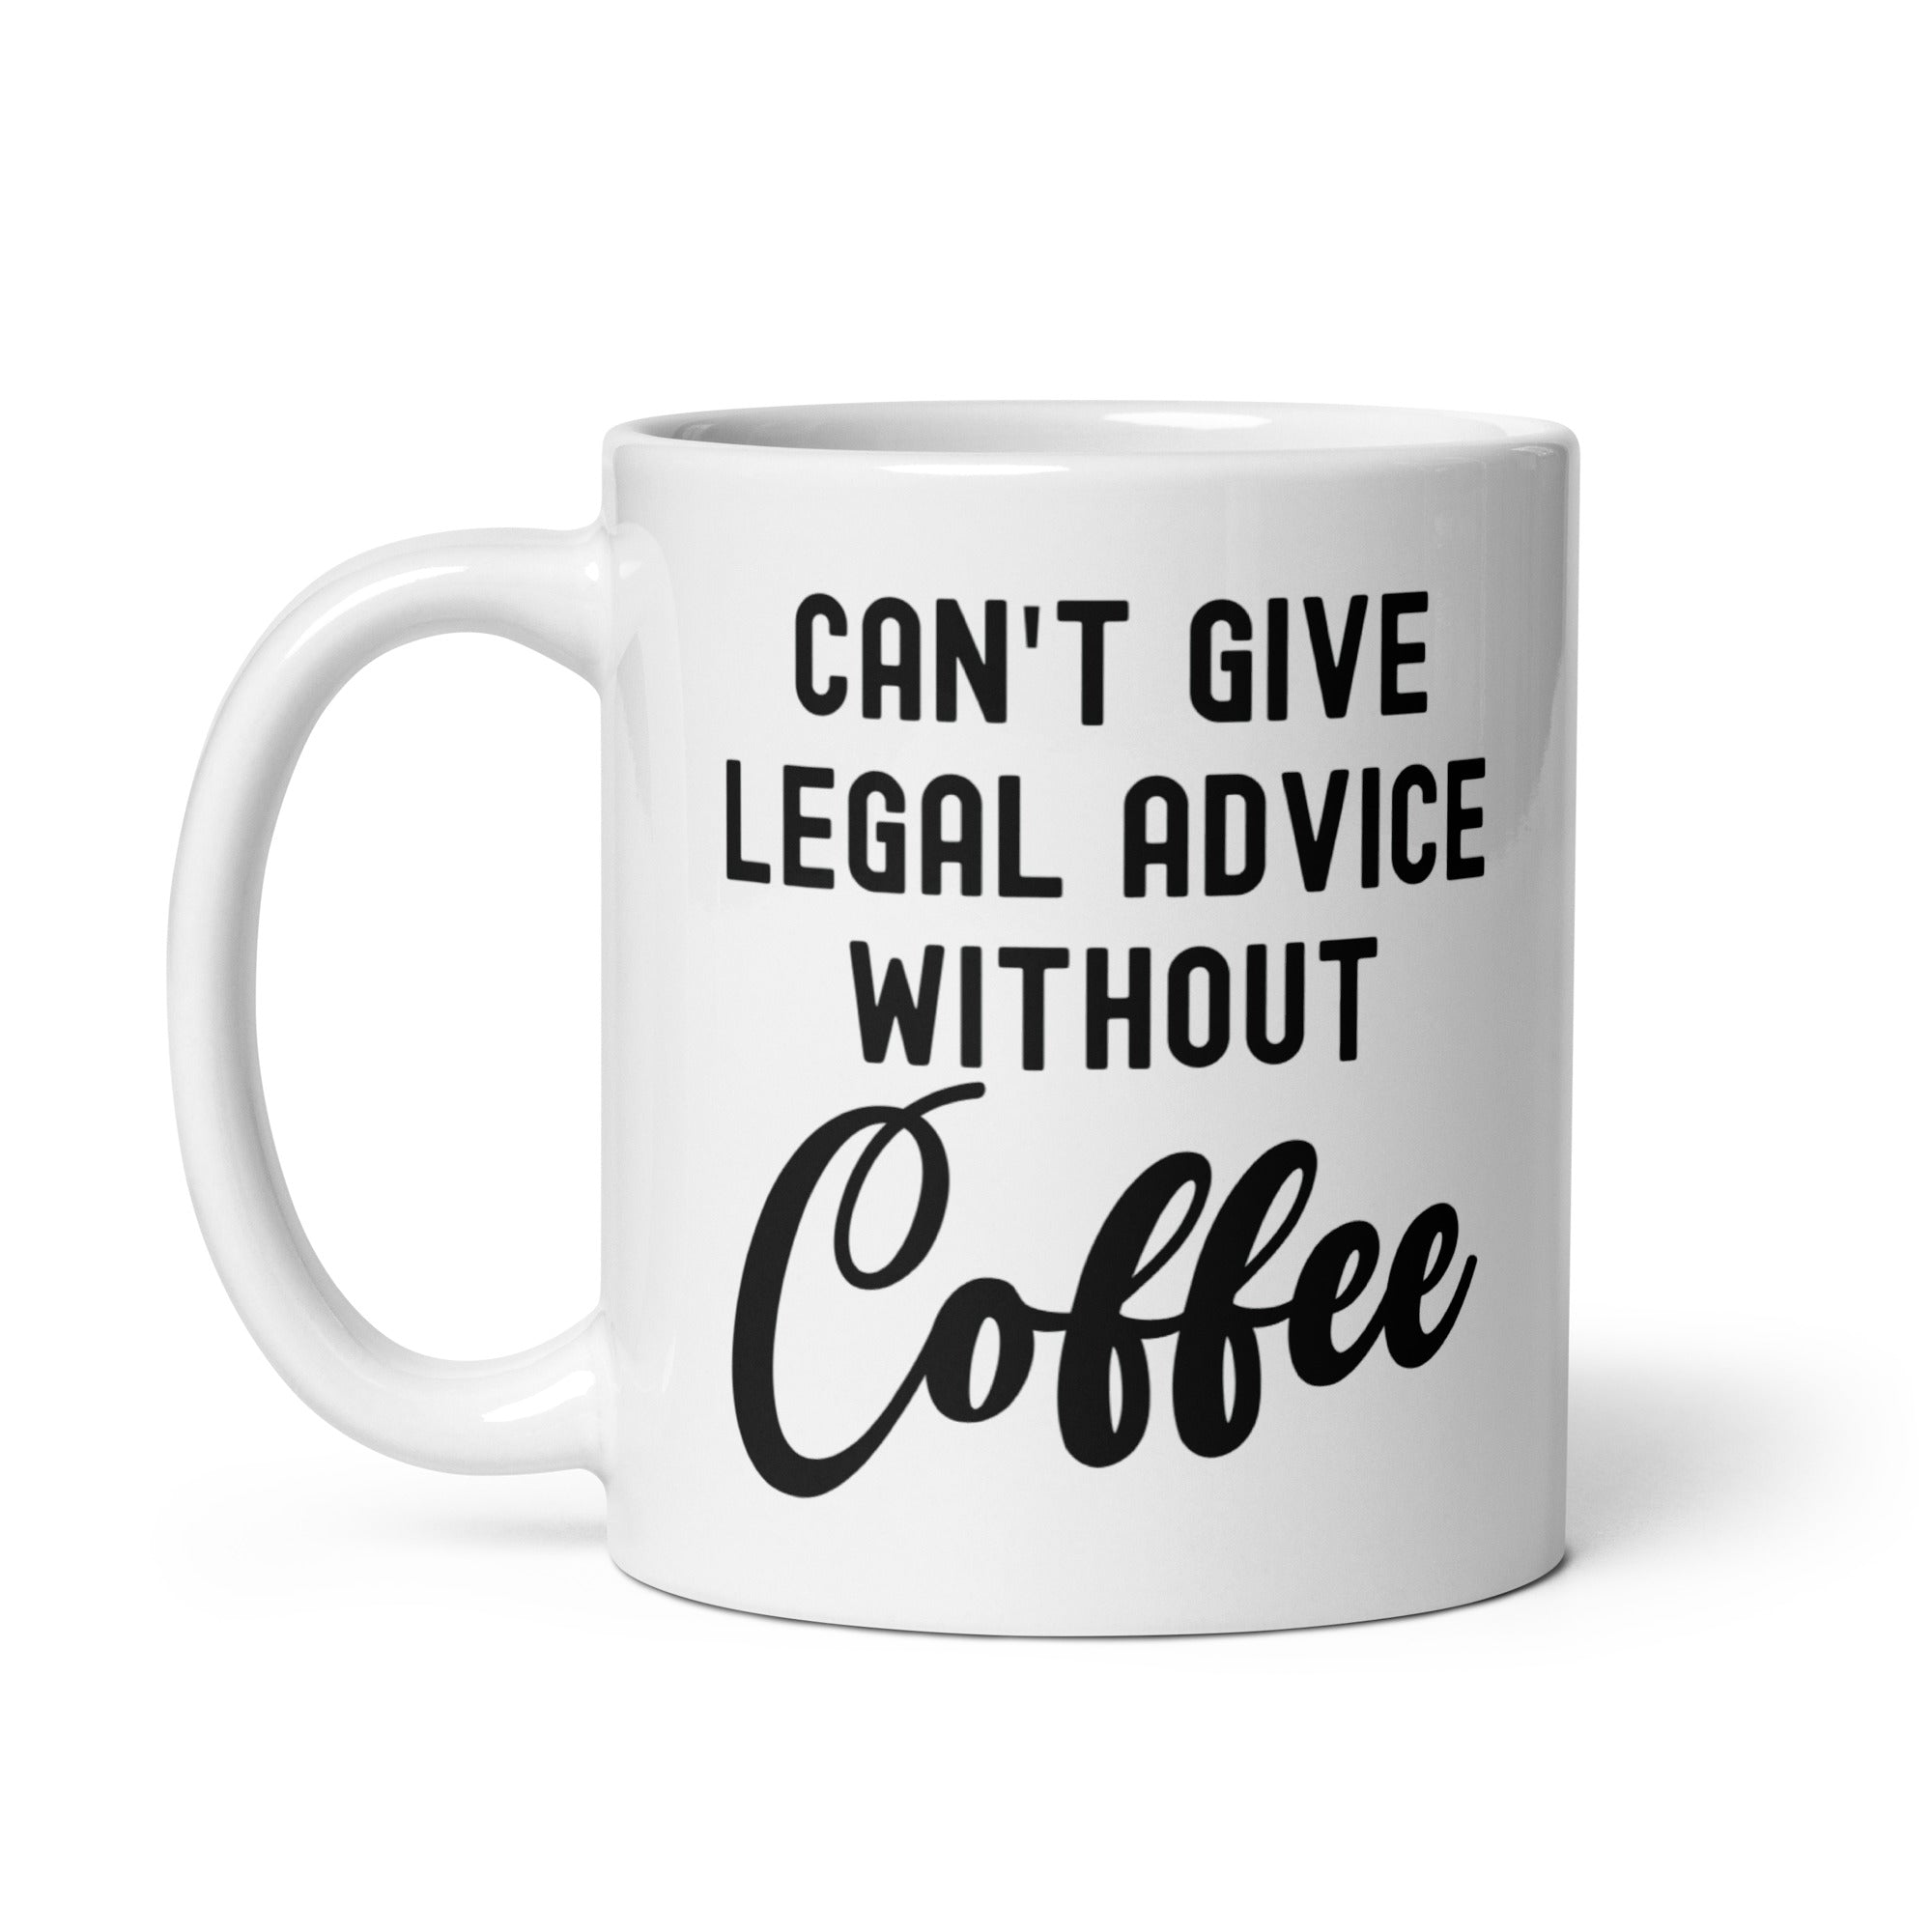 White glossy mug | Can’t give legal advice without coffee